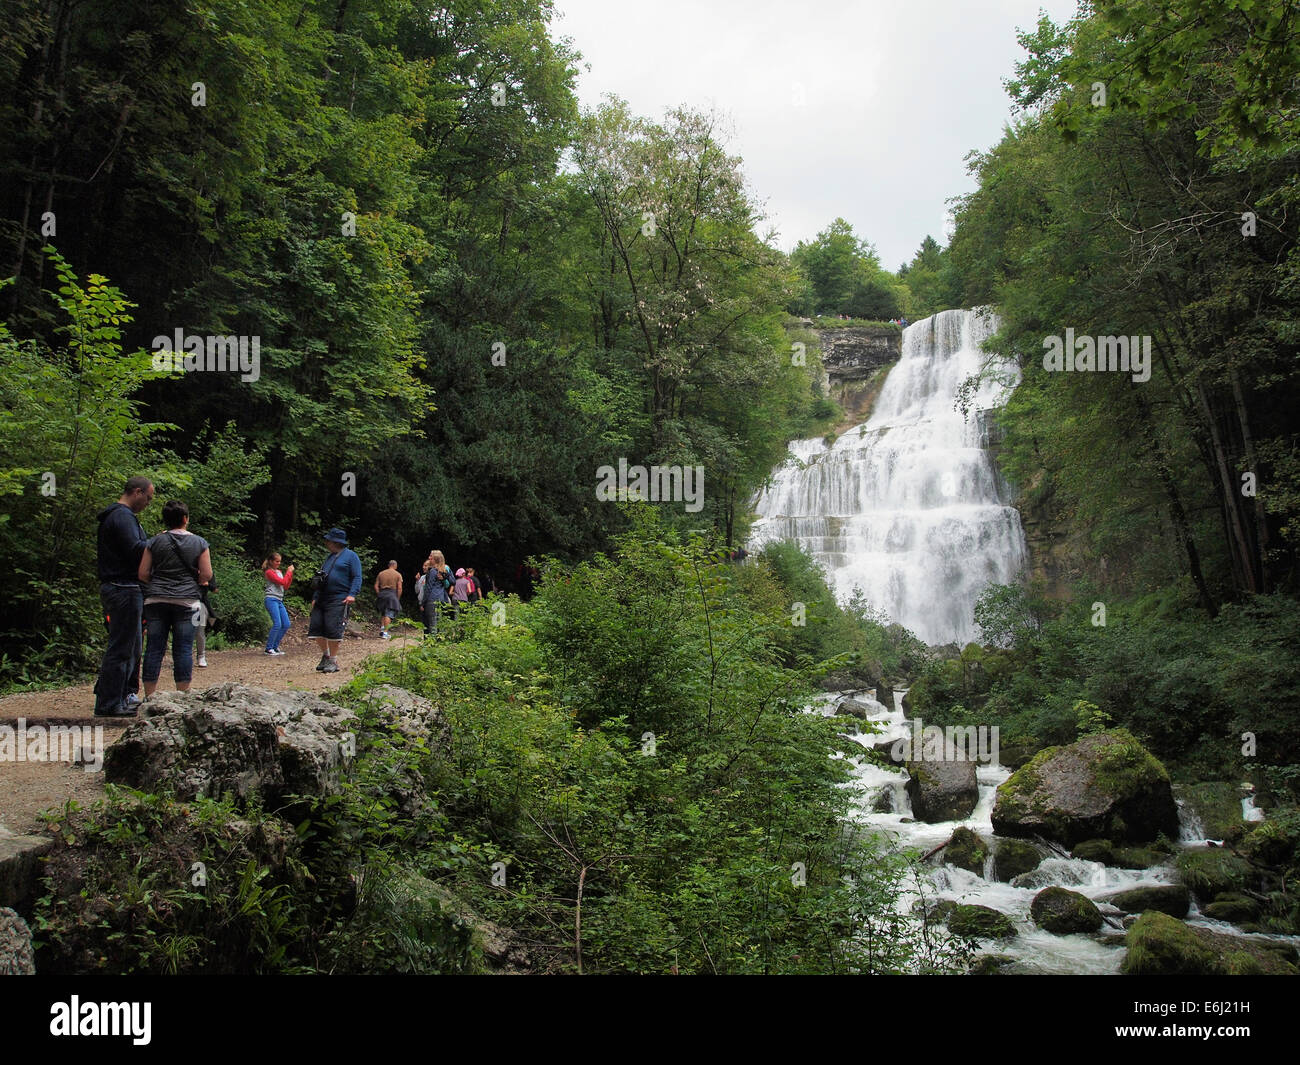 Tourists visiting the large waterfalls at Cascades de Herisson in the Jura region in France Stock Photo